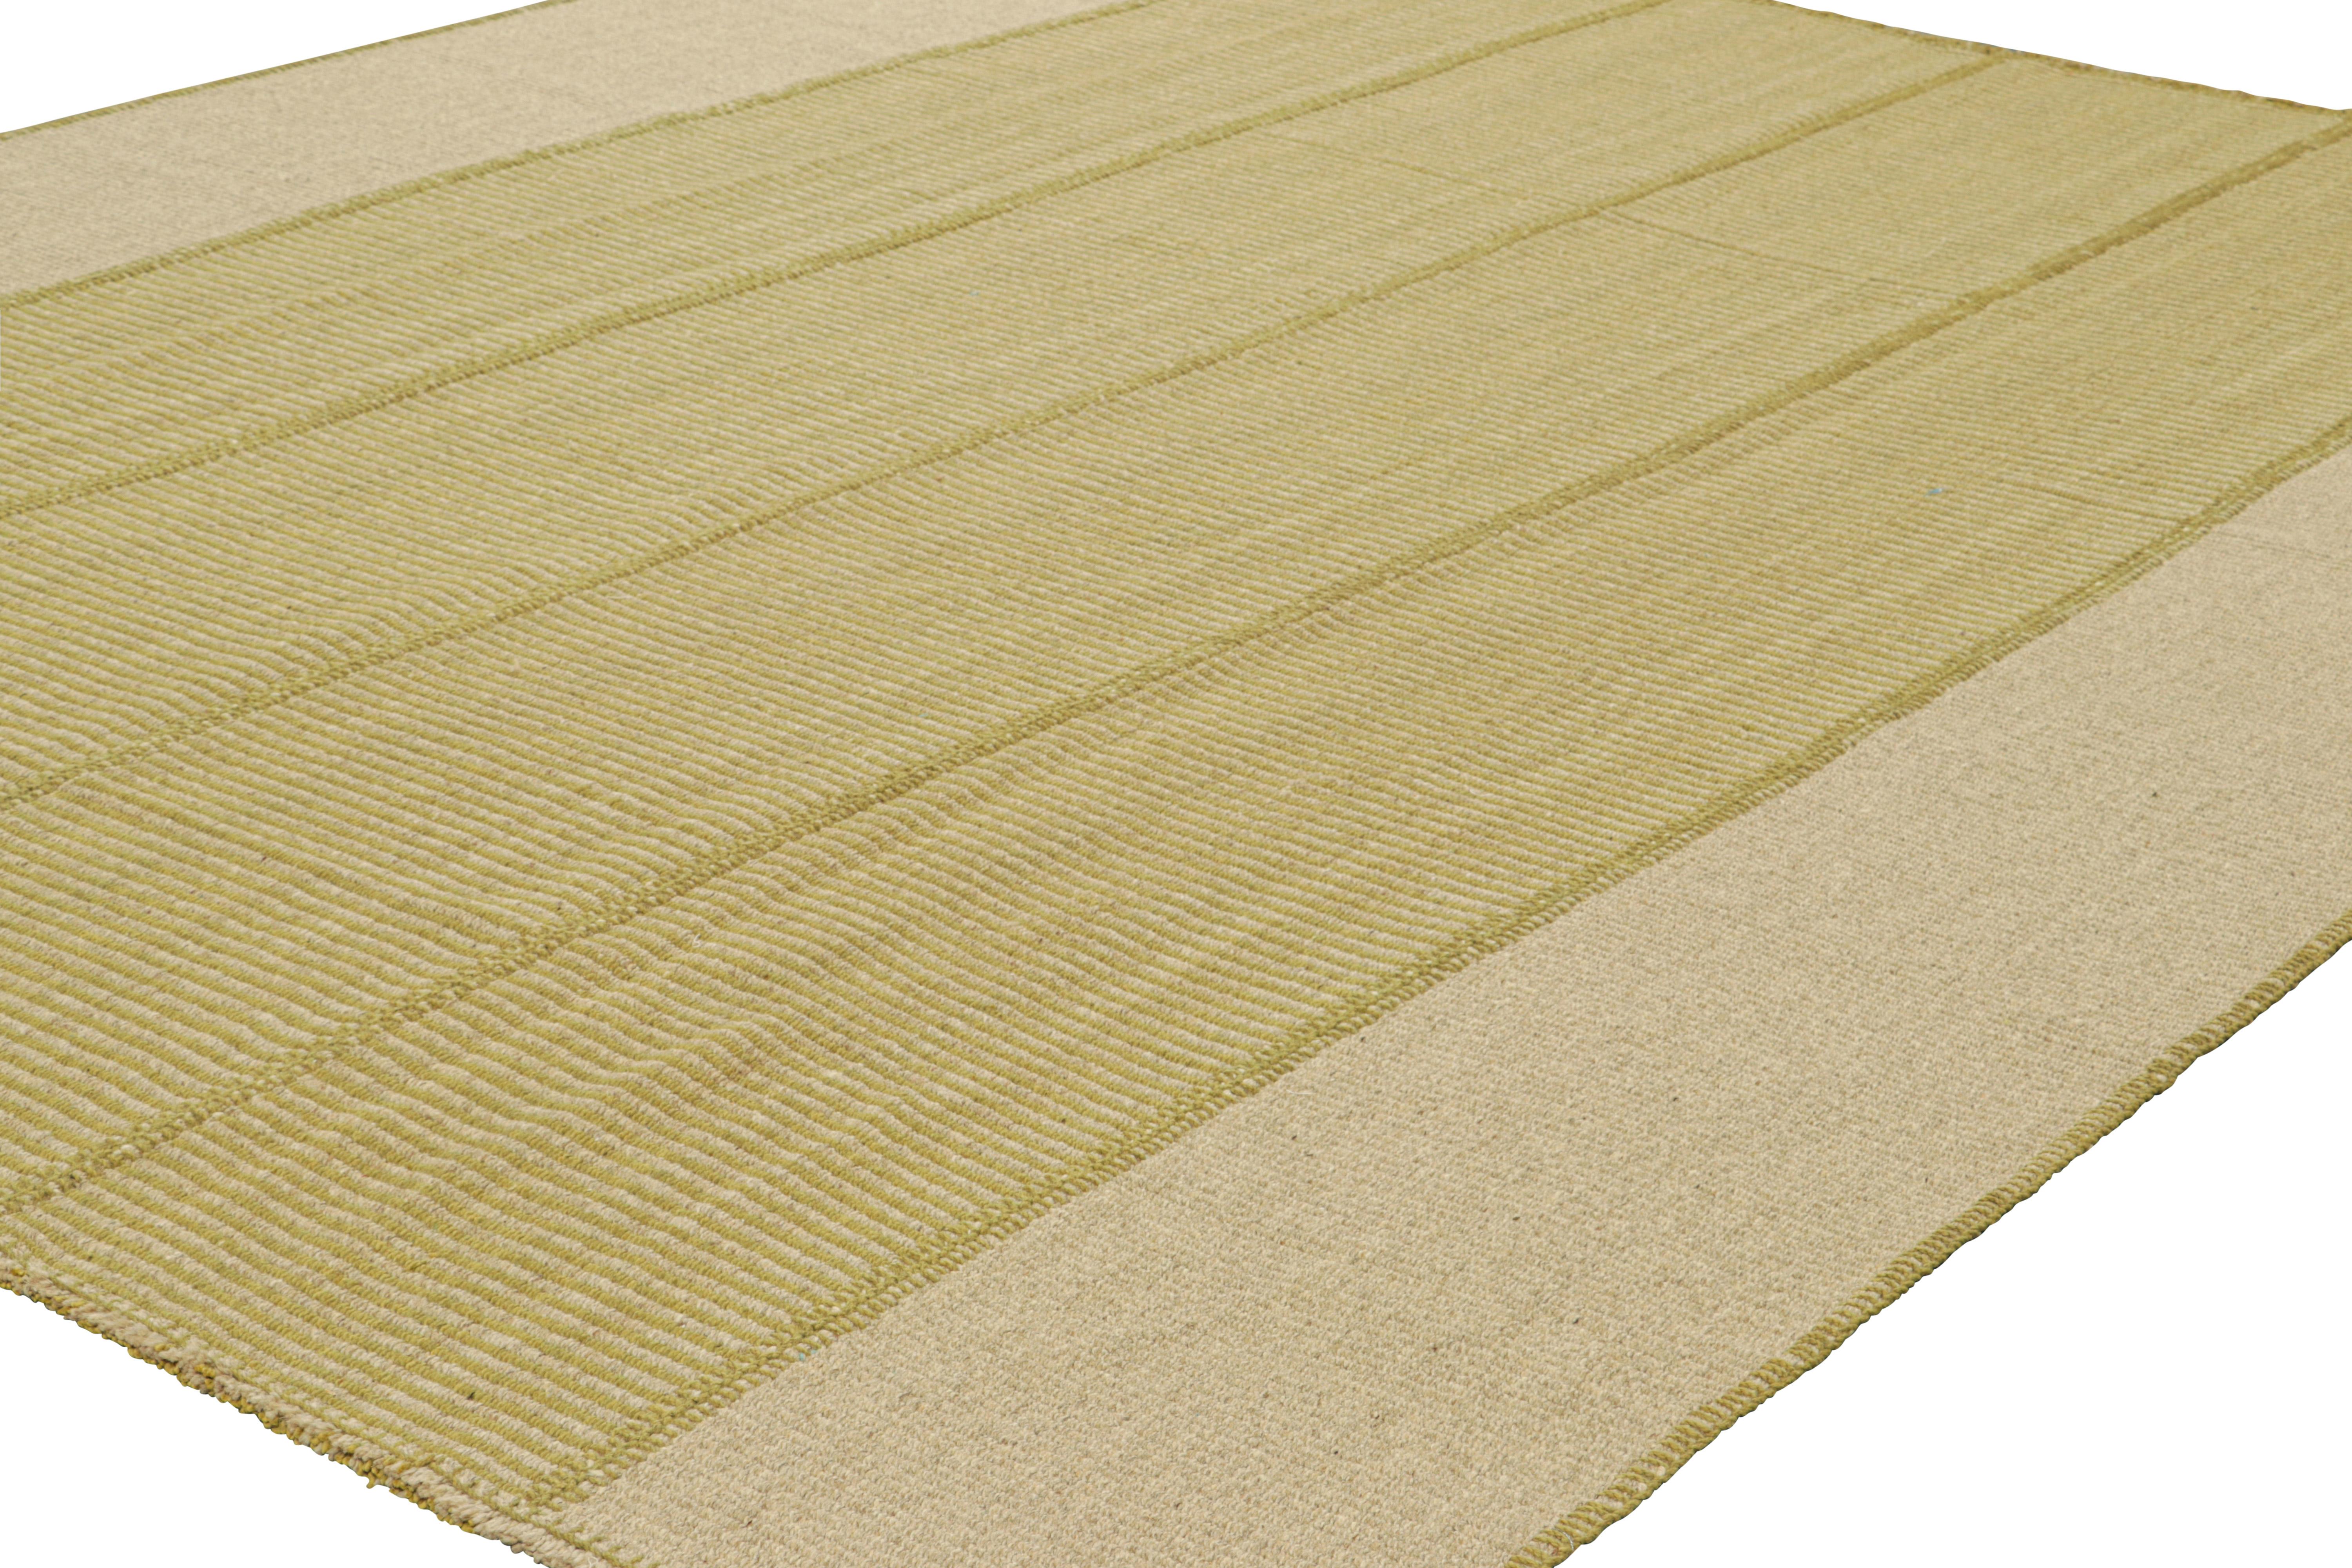 Afghan Rug & Kilim’s Contemporary Kilim in Beige and Gold Textural Stripes For Sale